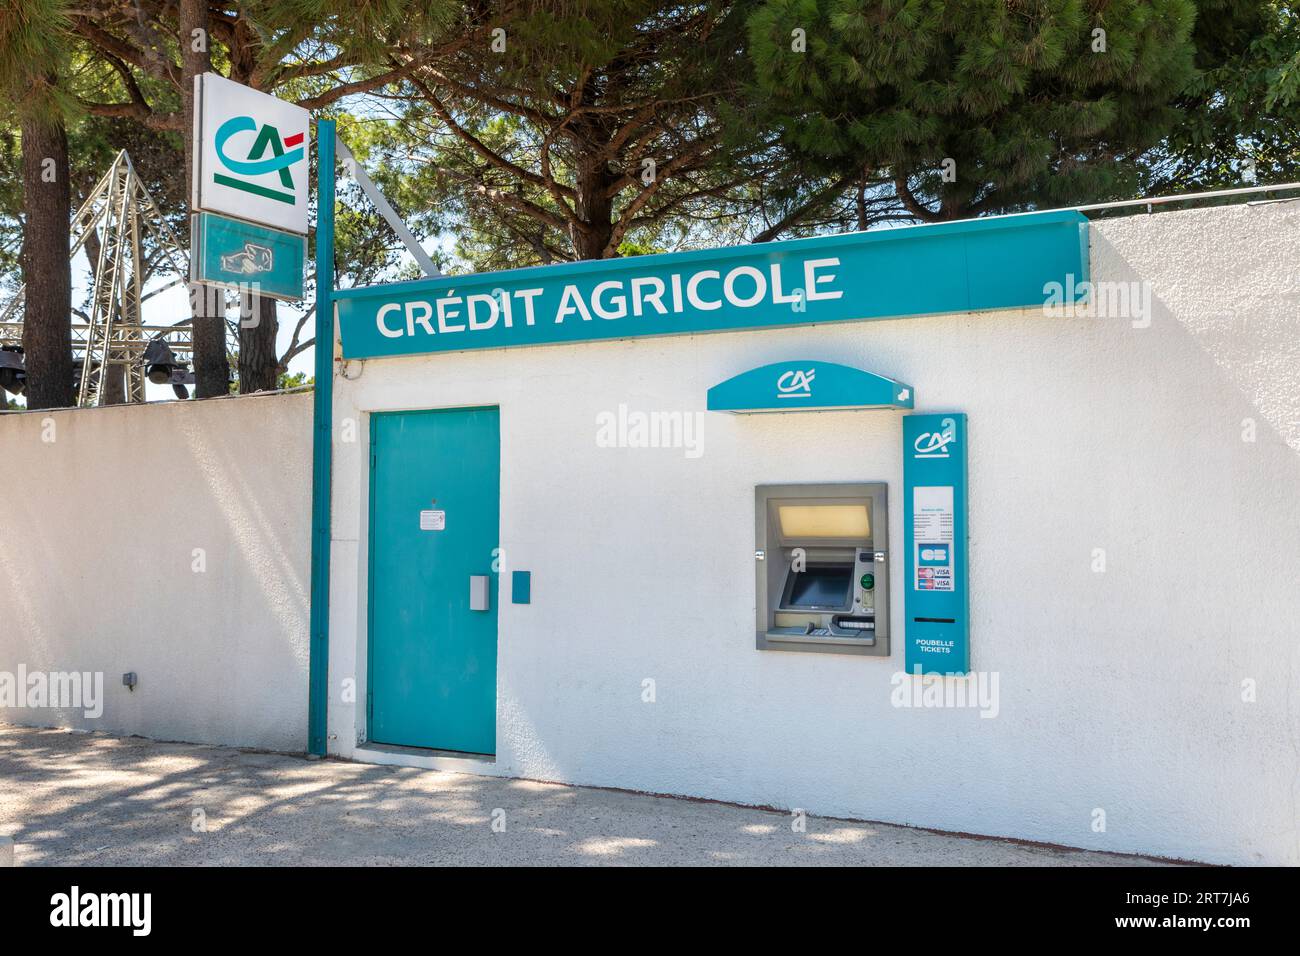 A Credit Agricole cash dispenser in Le Barcares, South of France Stock Photo